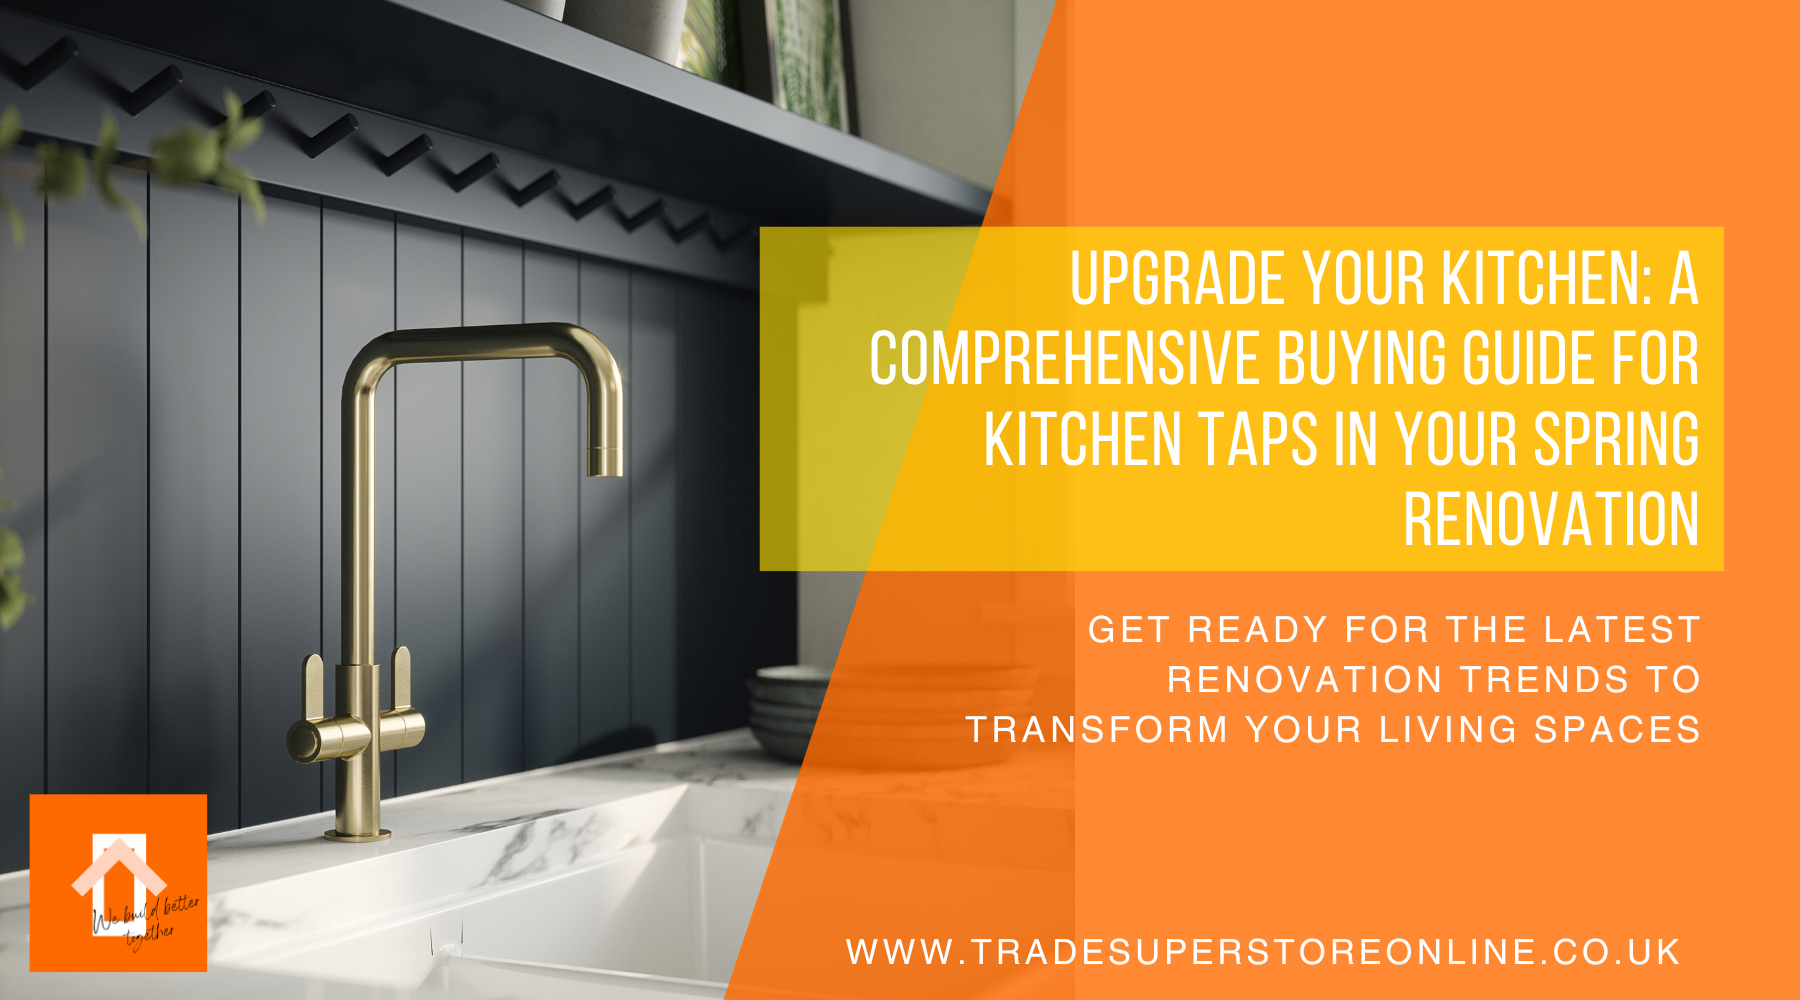 Upgrade Your Kitchen: A Comprehensive Buying Guide for Kitchen Taps in Your Spring Renovation